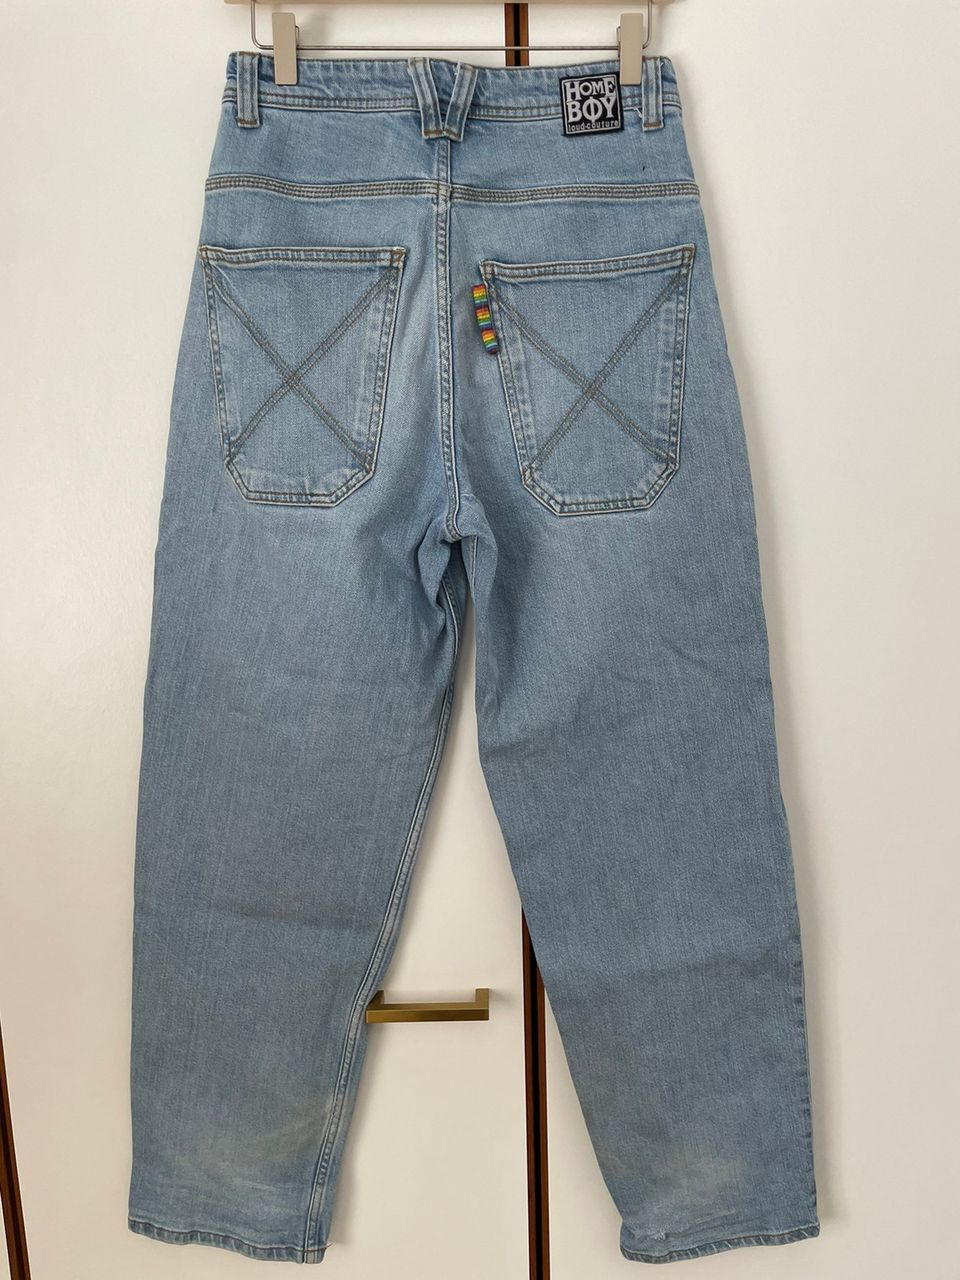 Baggy jeans Home Boy 27/32